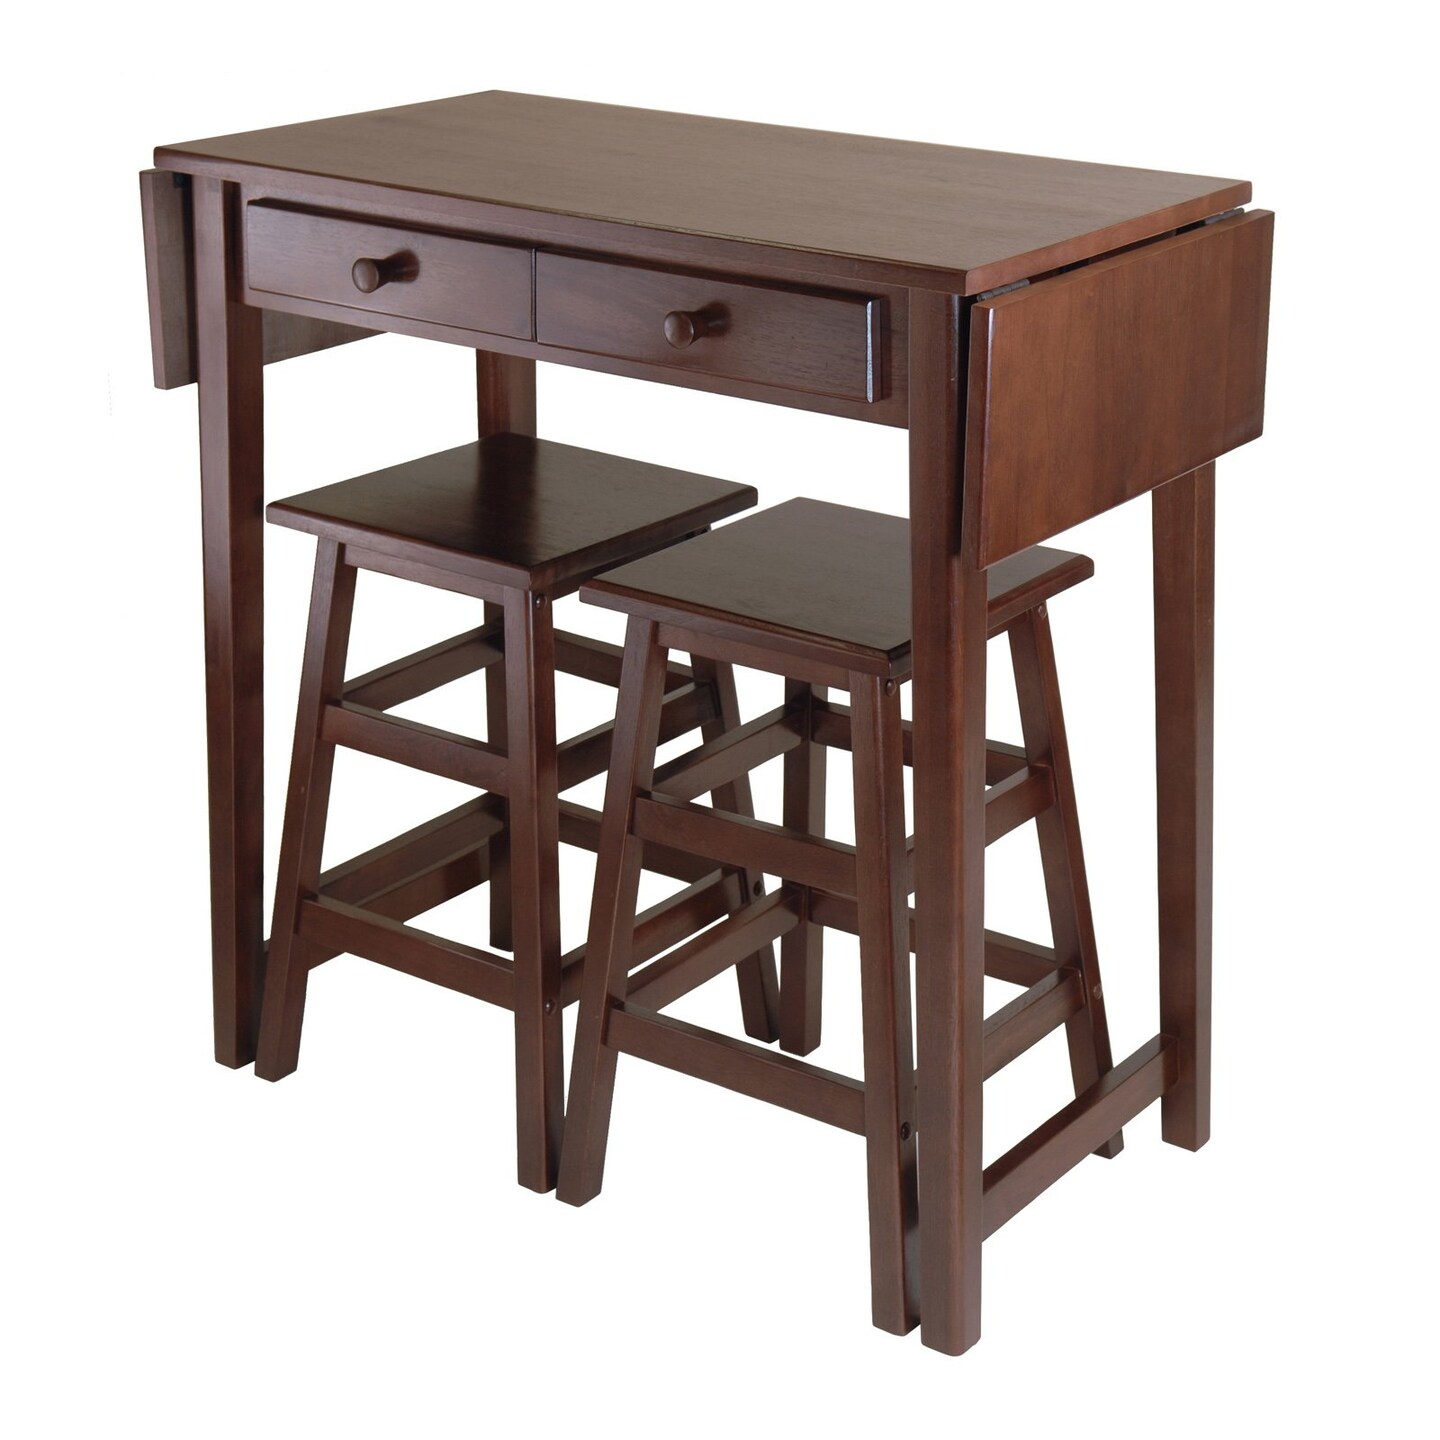 Space-Saving Double Drop Leaf Table